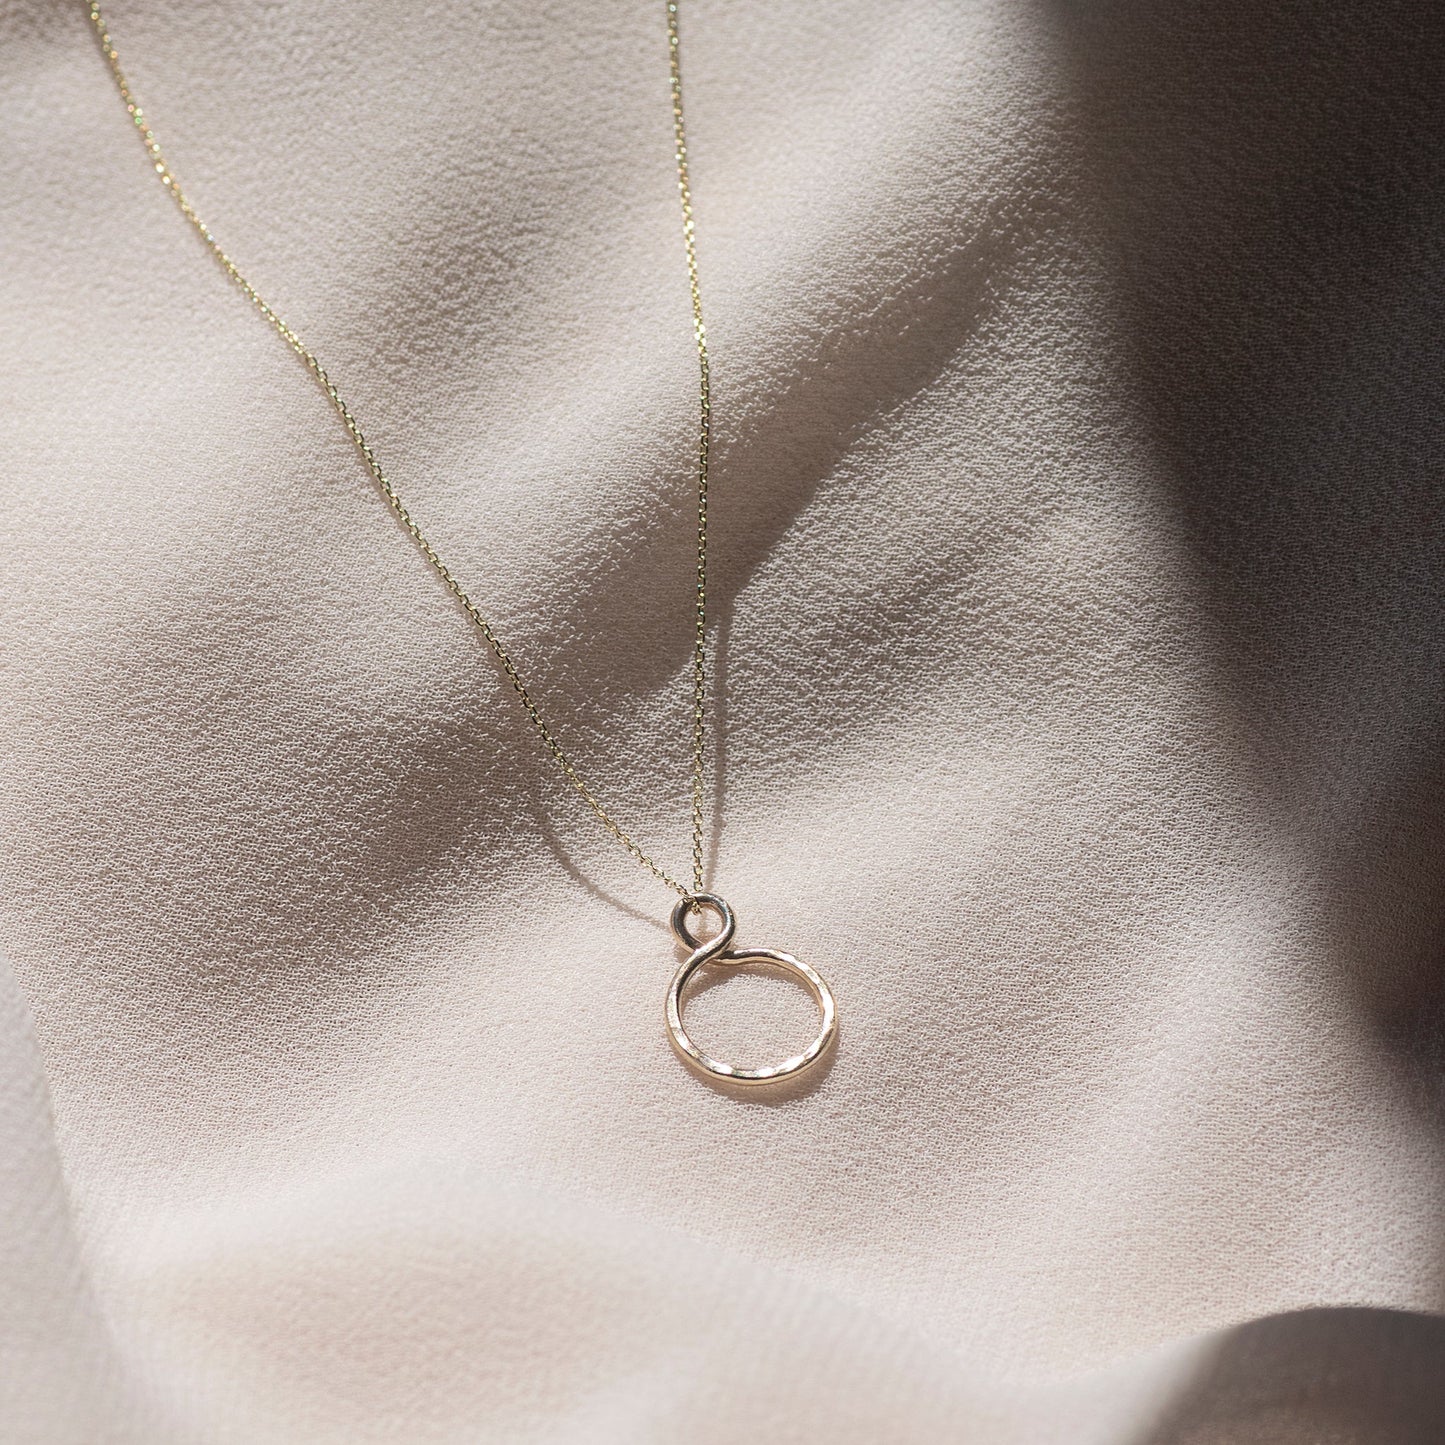 Wedding Day Gift for Daughter - 9kt Gold Infinity Necklace